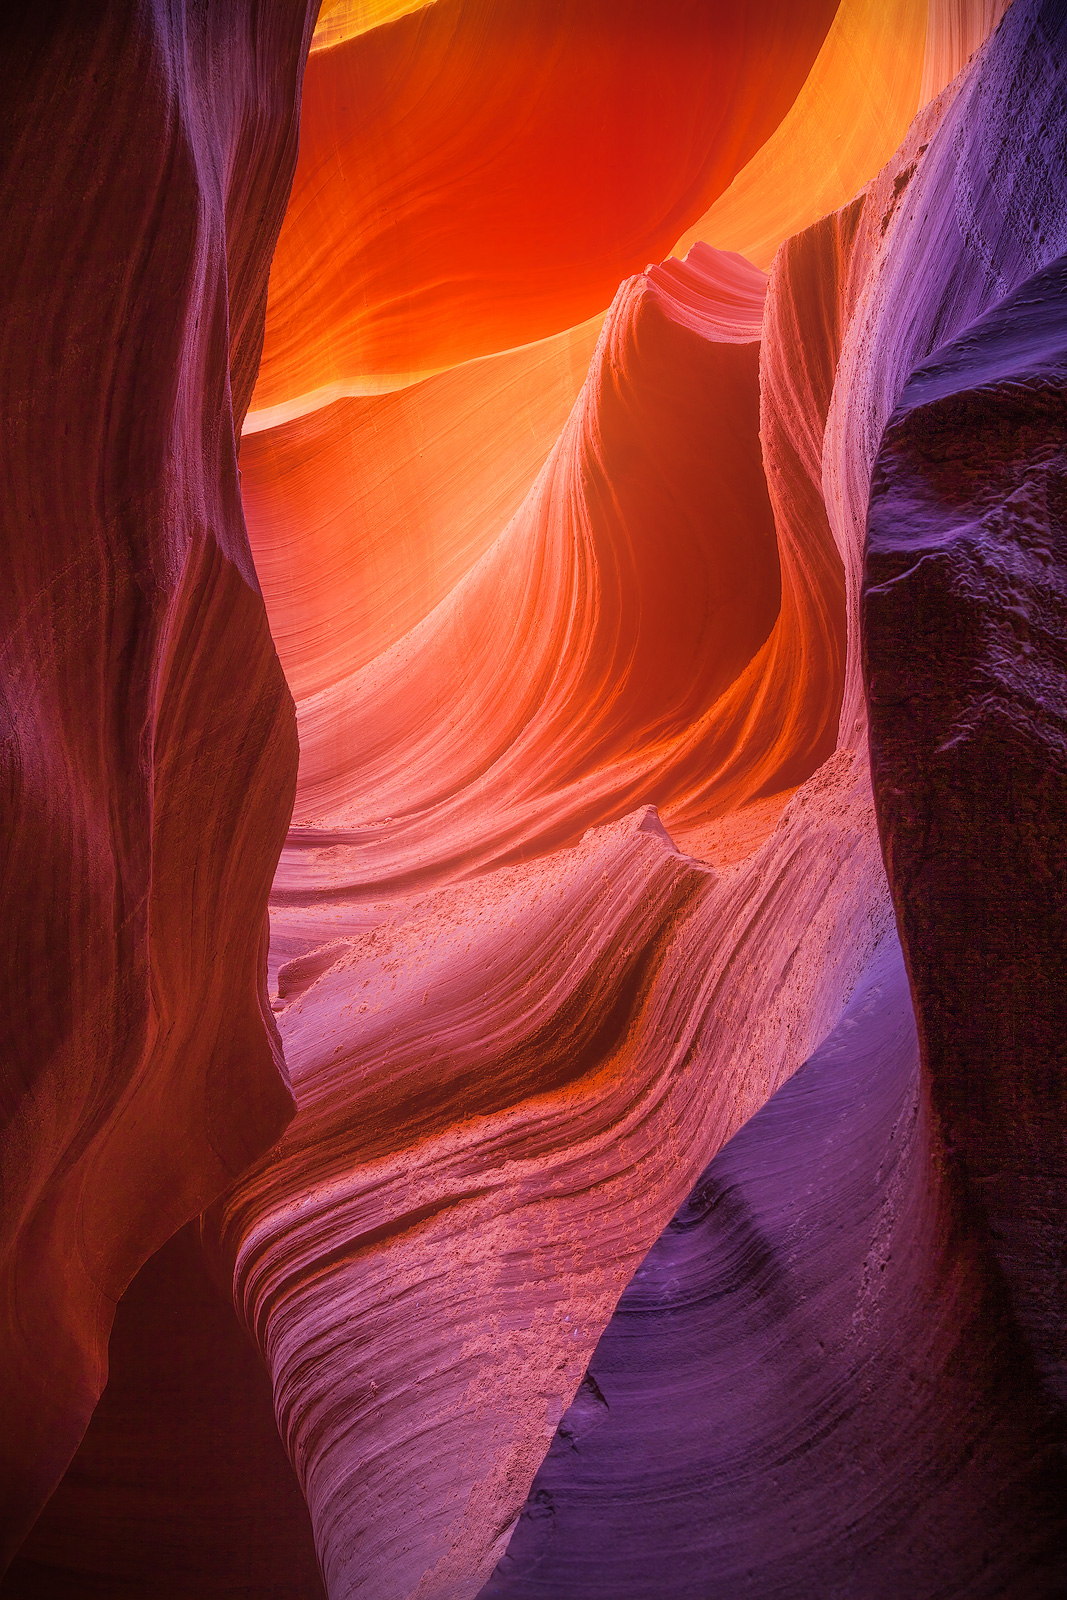 Beautifully shaped rock with color variety inside a slot canyon.